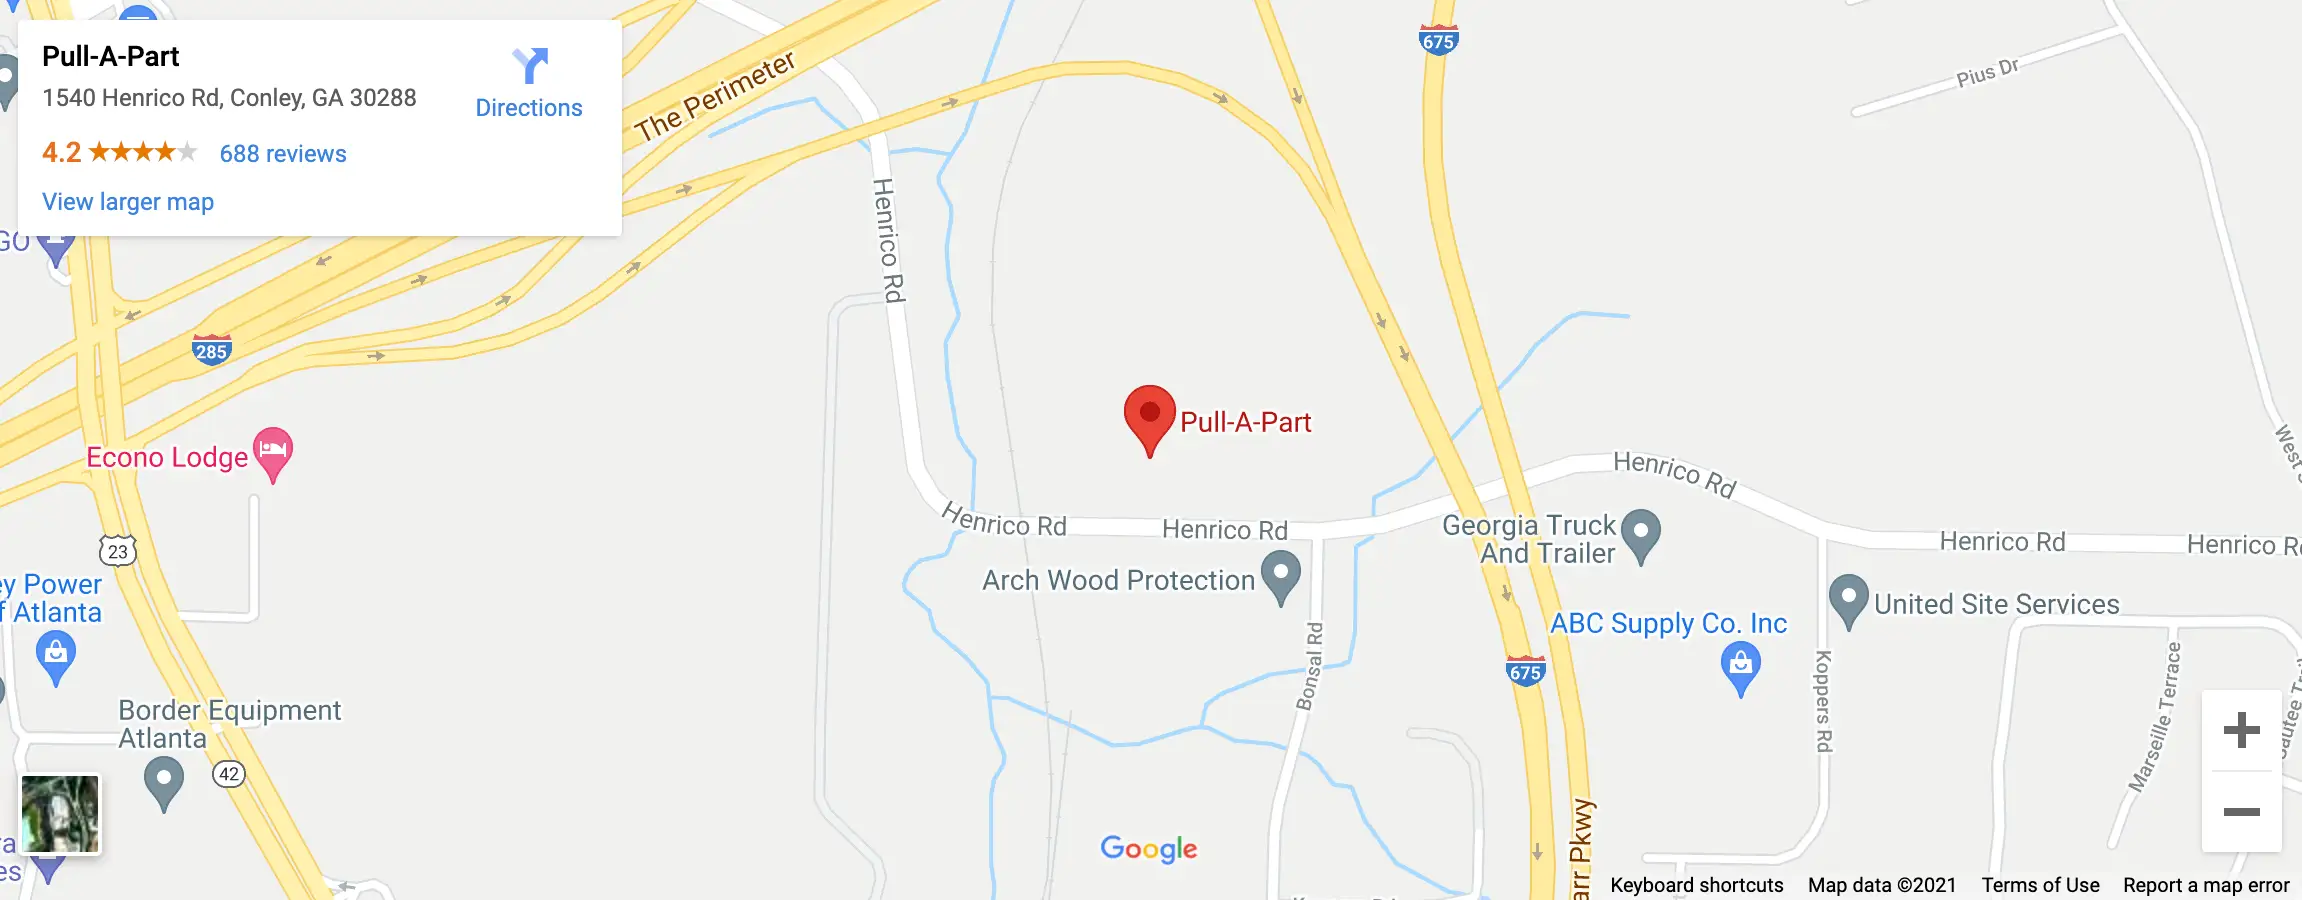 Get Directions to Pull-A-Part Atlanta South